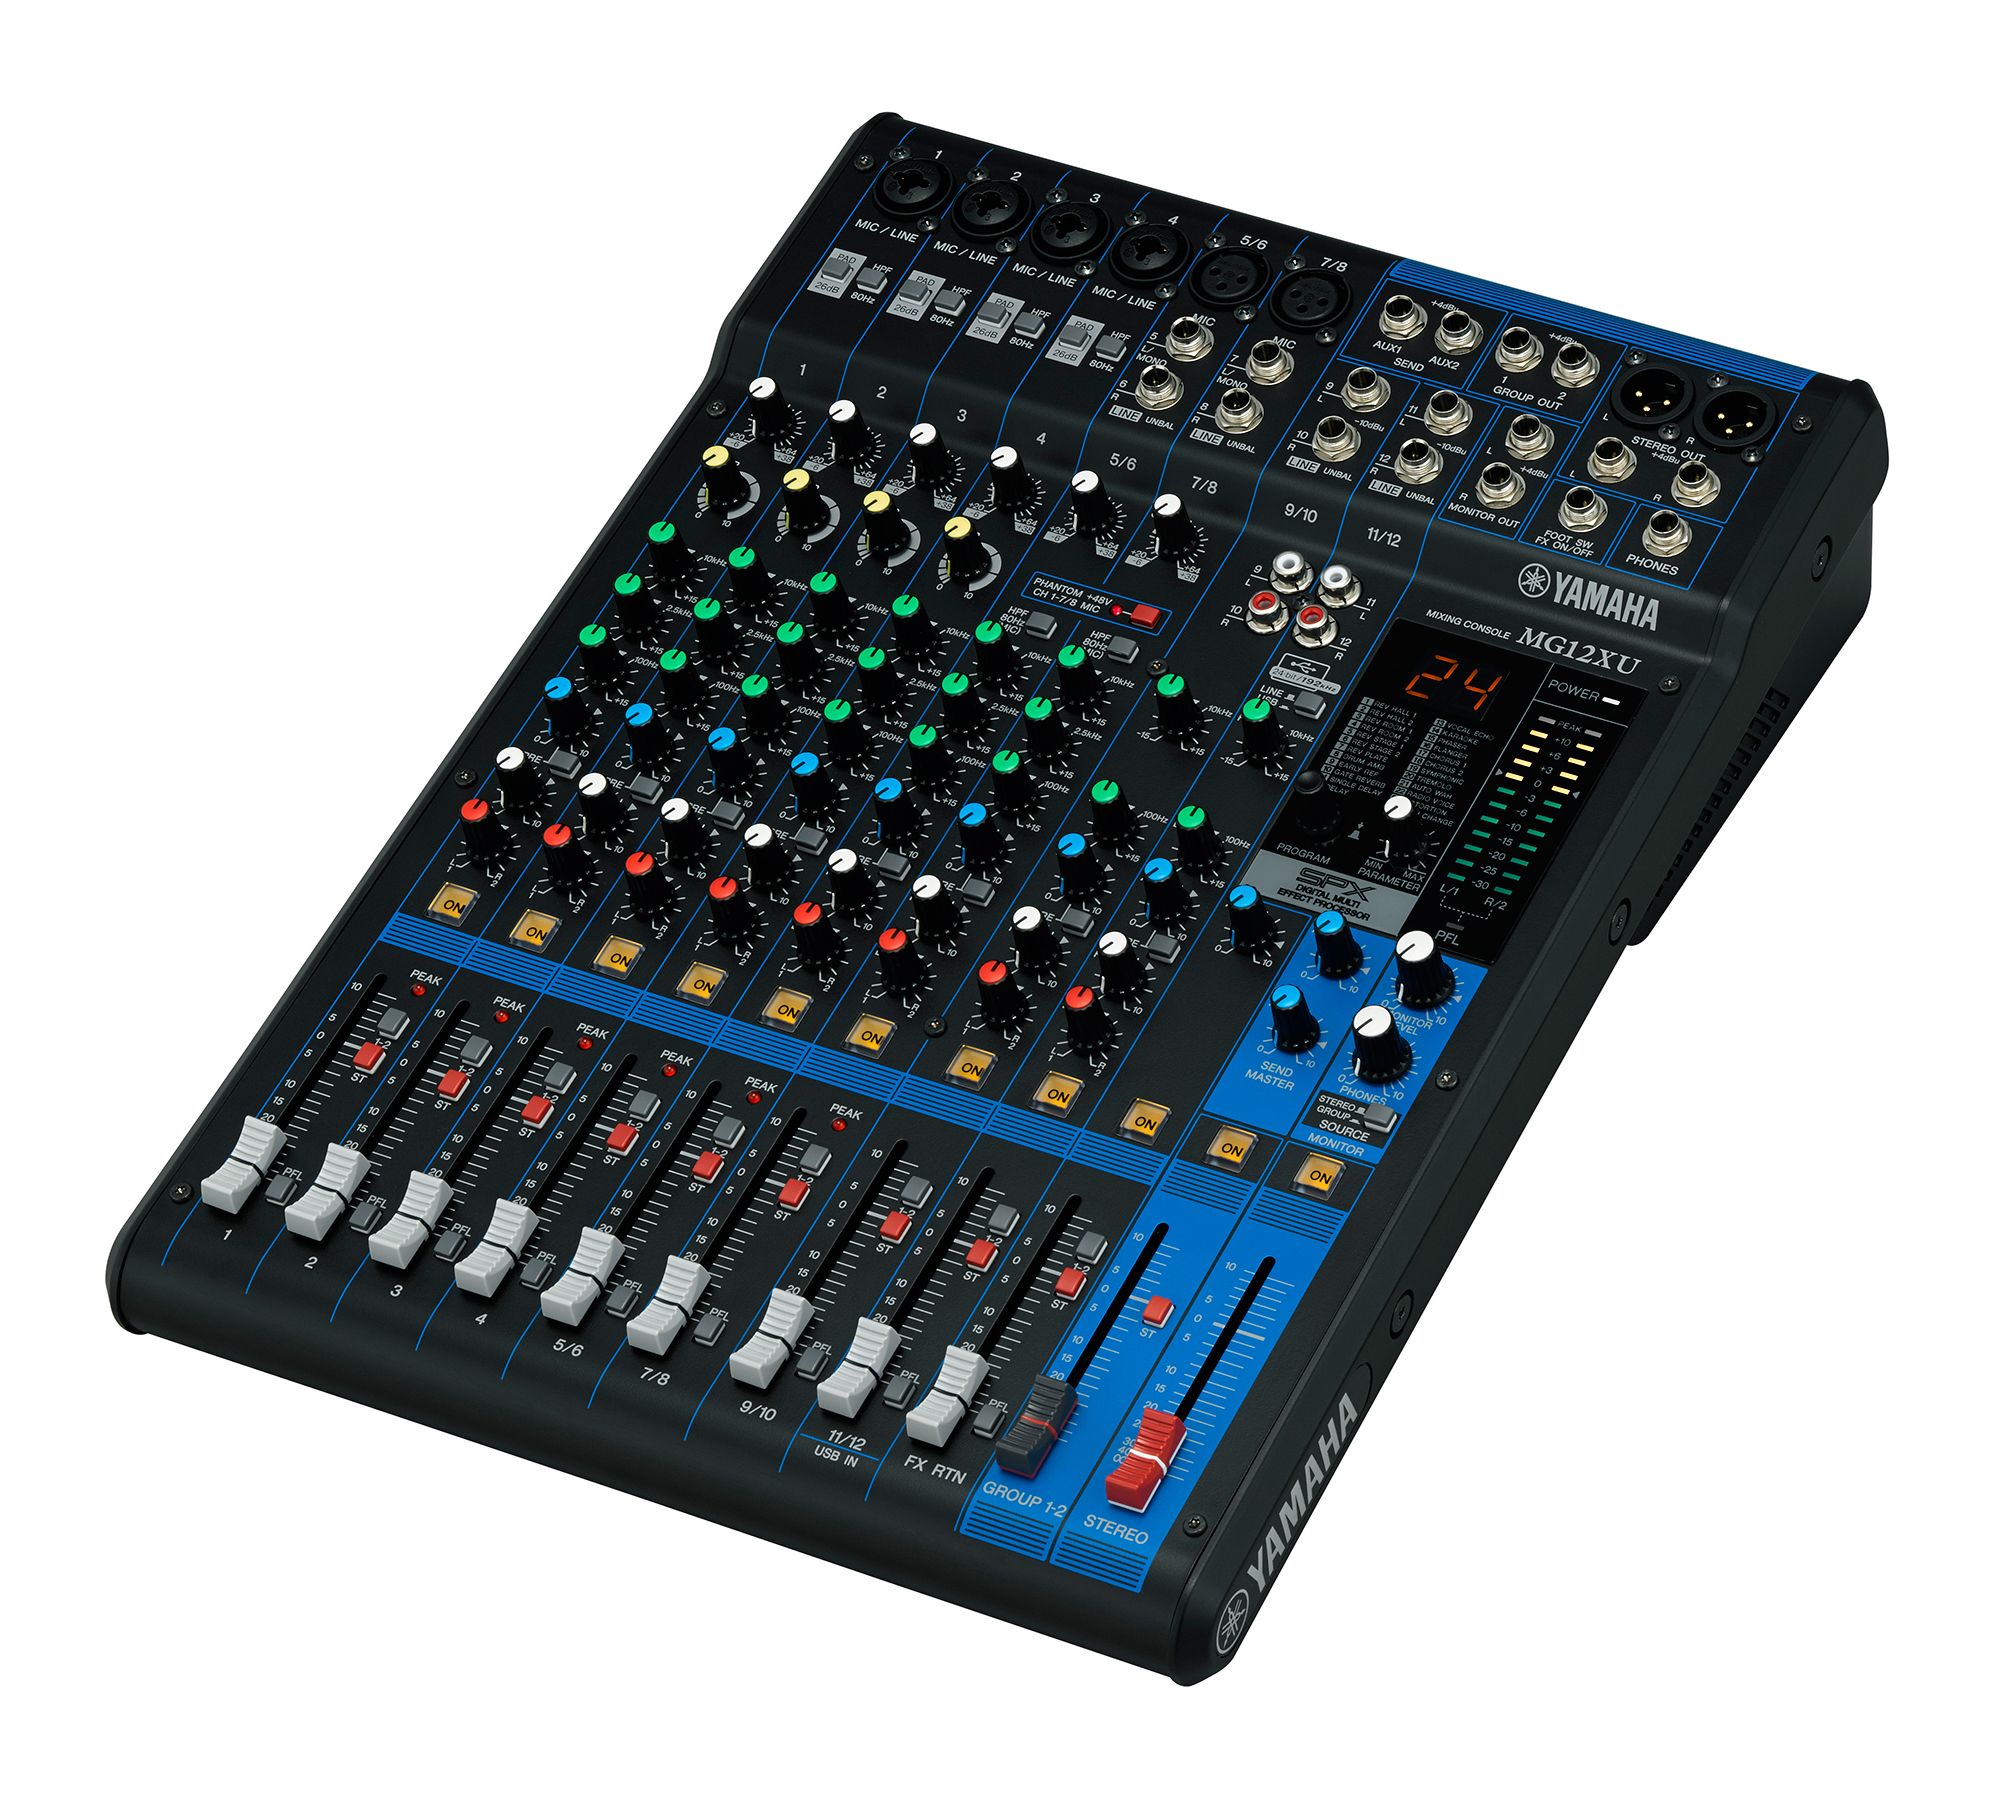 MG12XU 12-Channel Mixer with Effects